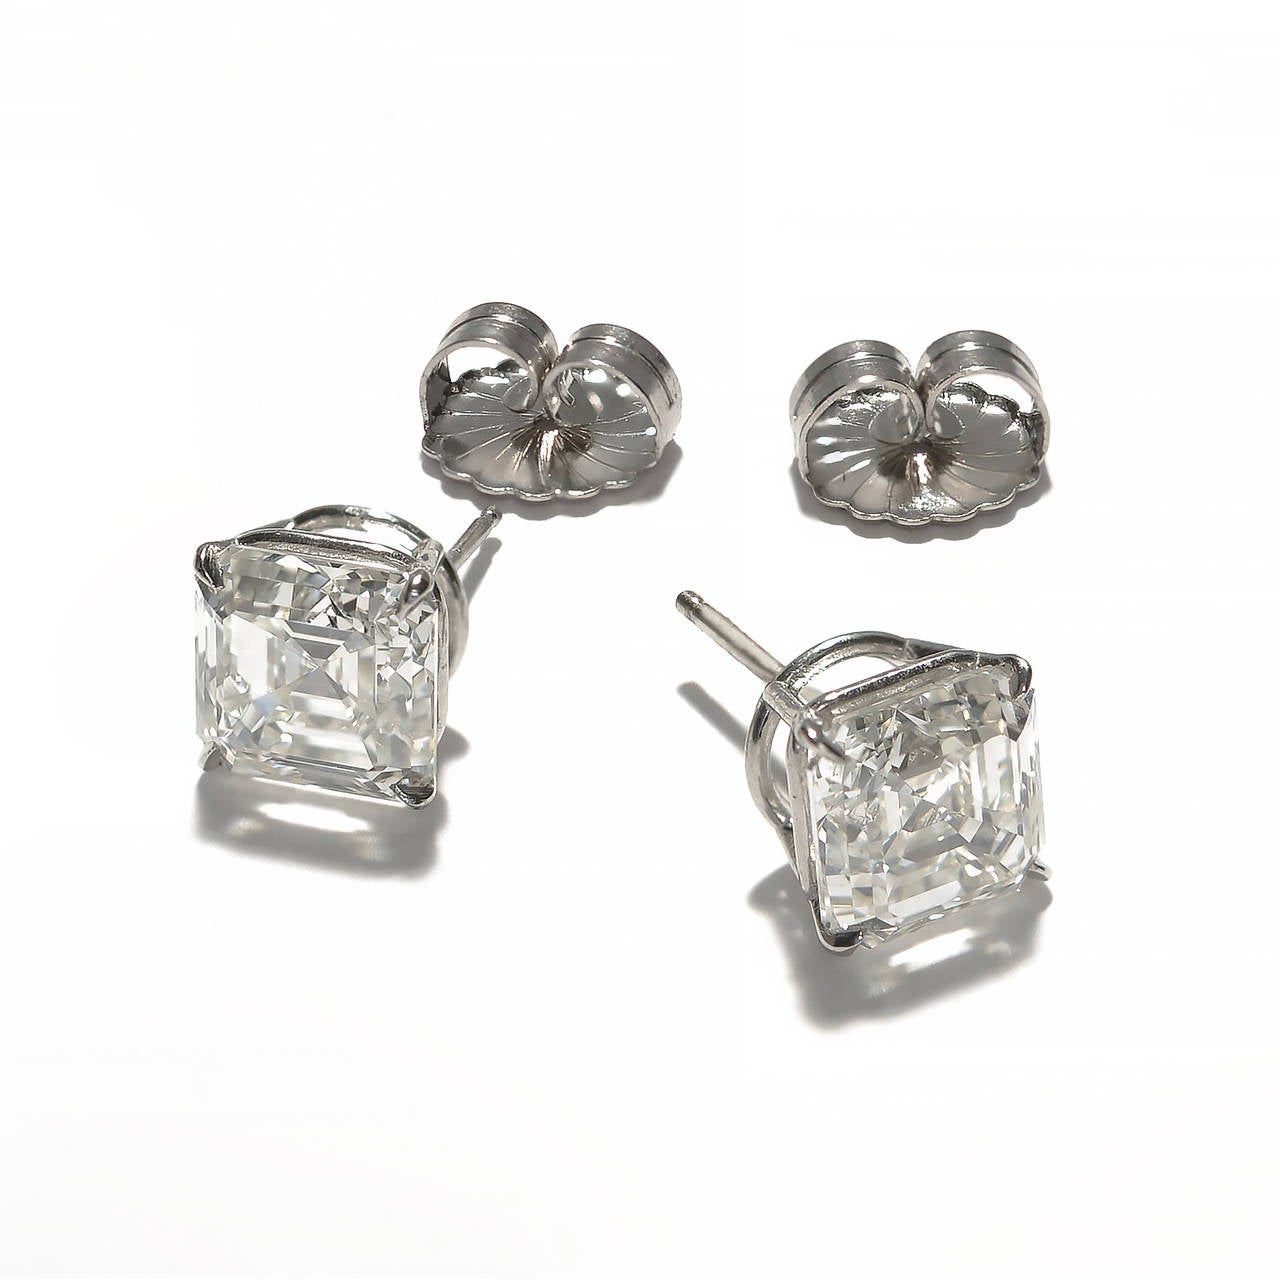 Matched GIA certified diamond studs with exceptional sparkle and presence in simple platinum four prong settings. 8.15ct total weight. Perfectly matched. Probably cut to match. 4.06 and 4.08ct, both I color and face up white.  Both VS, clarity.